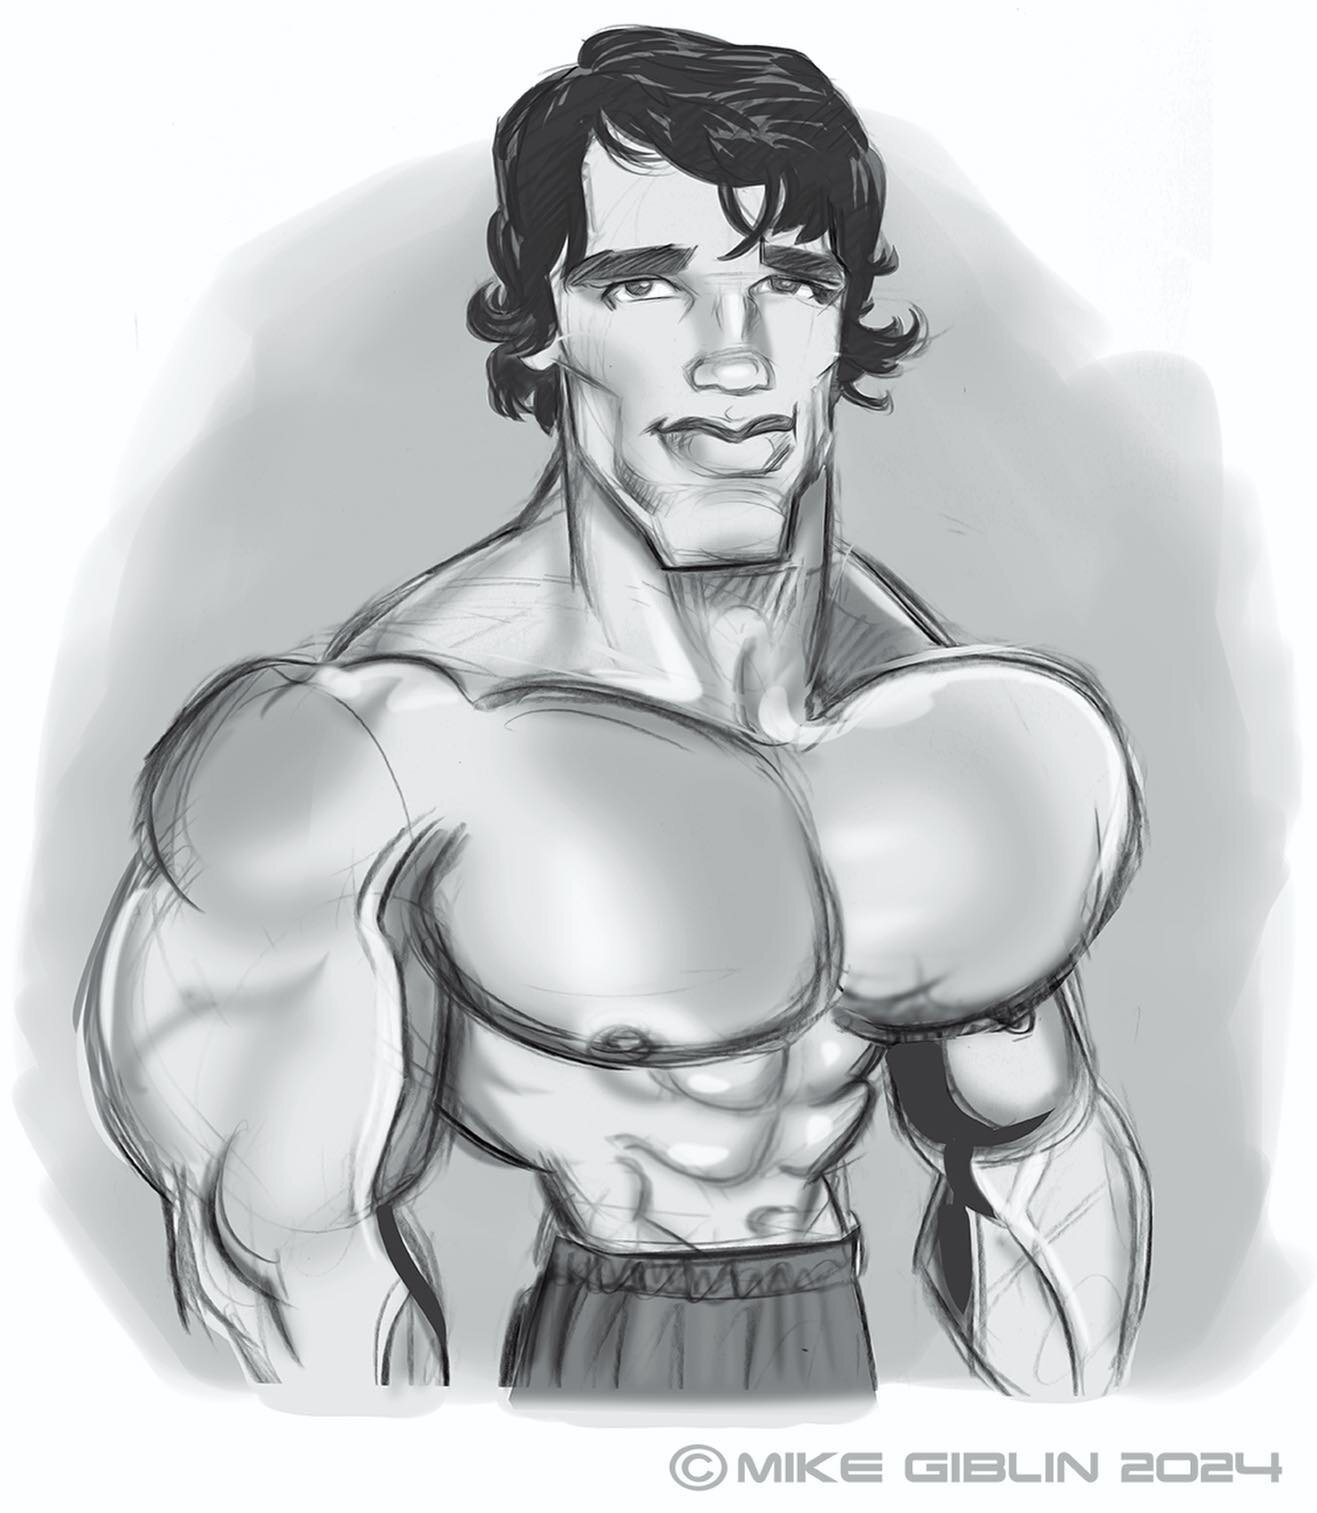 Something I&rsquo;ve been doodling around with this afternoon. It started as a pencil sketch before I scanned for some adjustments and shading.

I find Arnold in his bodybuilding days endlessly fascinating to draw, his physique was just insane.

#arn